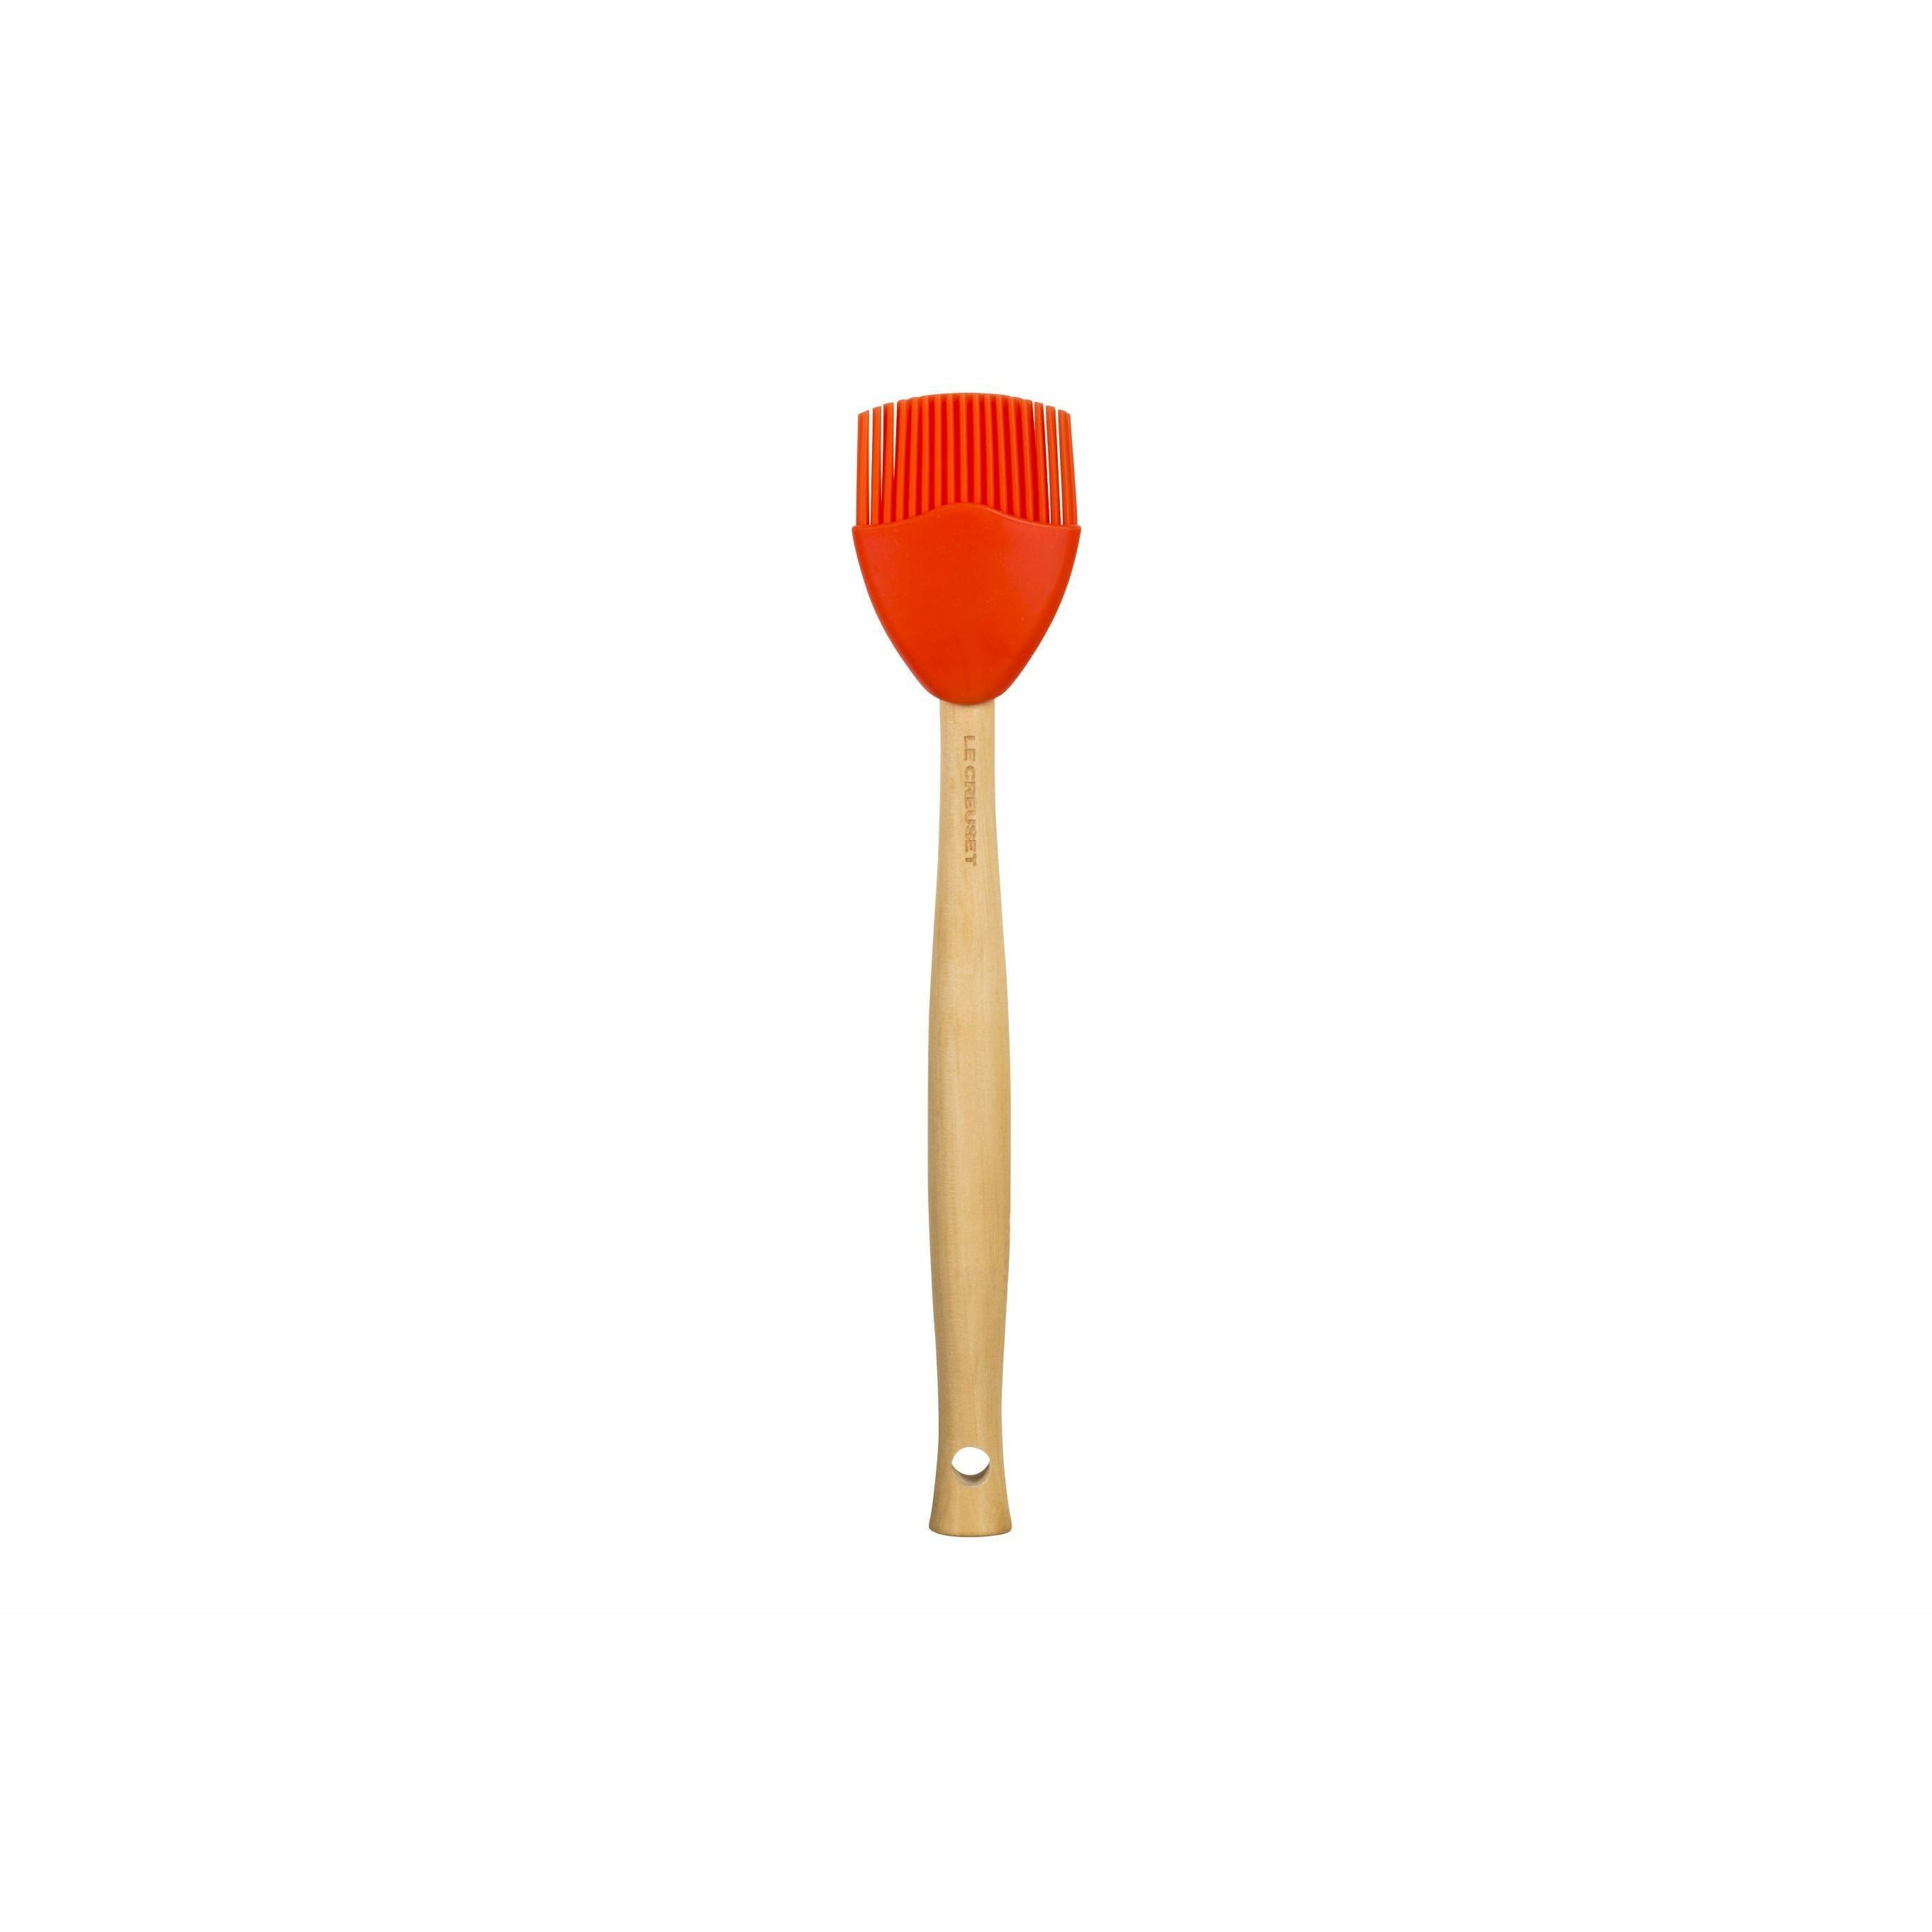 Le Creuset Craft Grill and Baking Brush, Volcanic